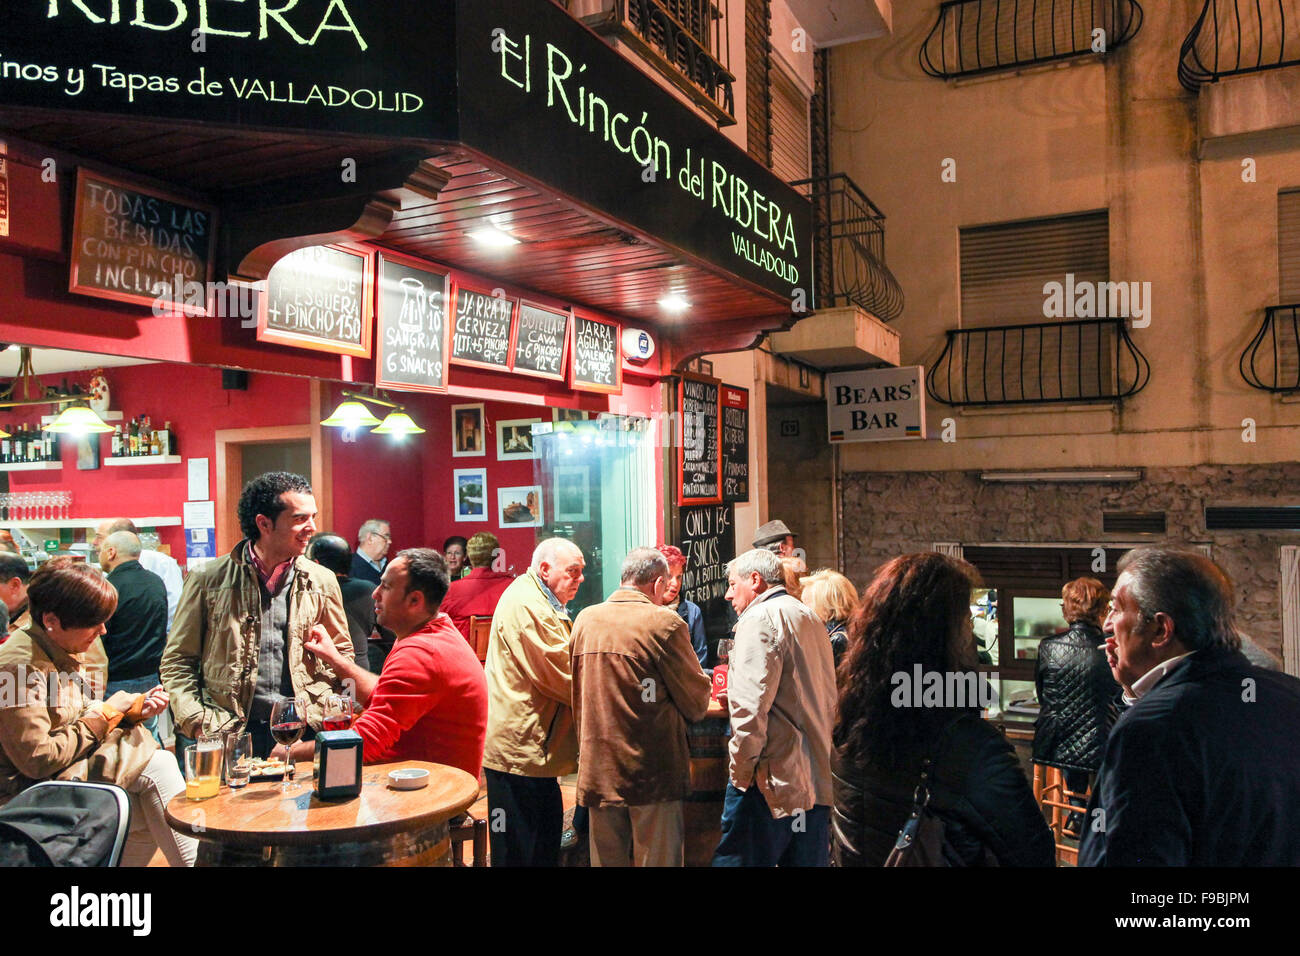 El Rincon De Ribera Tapas Bar restaurant in Benidorm old town with customers eating and drinking outside. Stock Photo